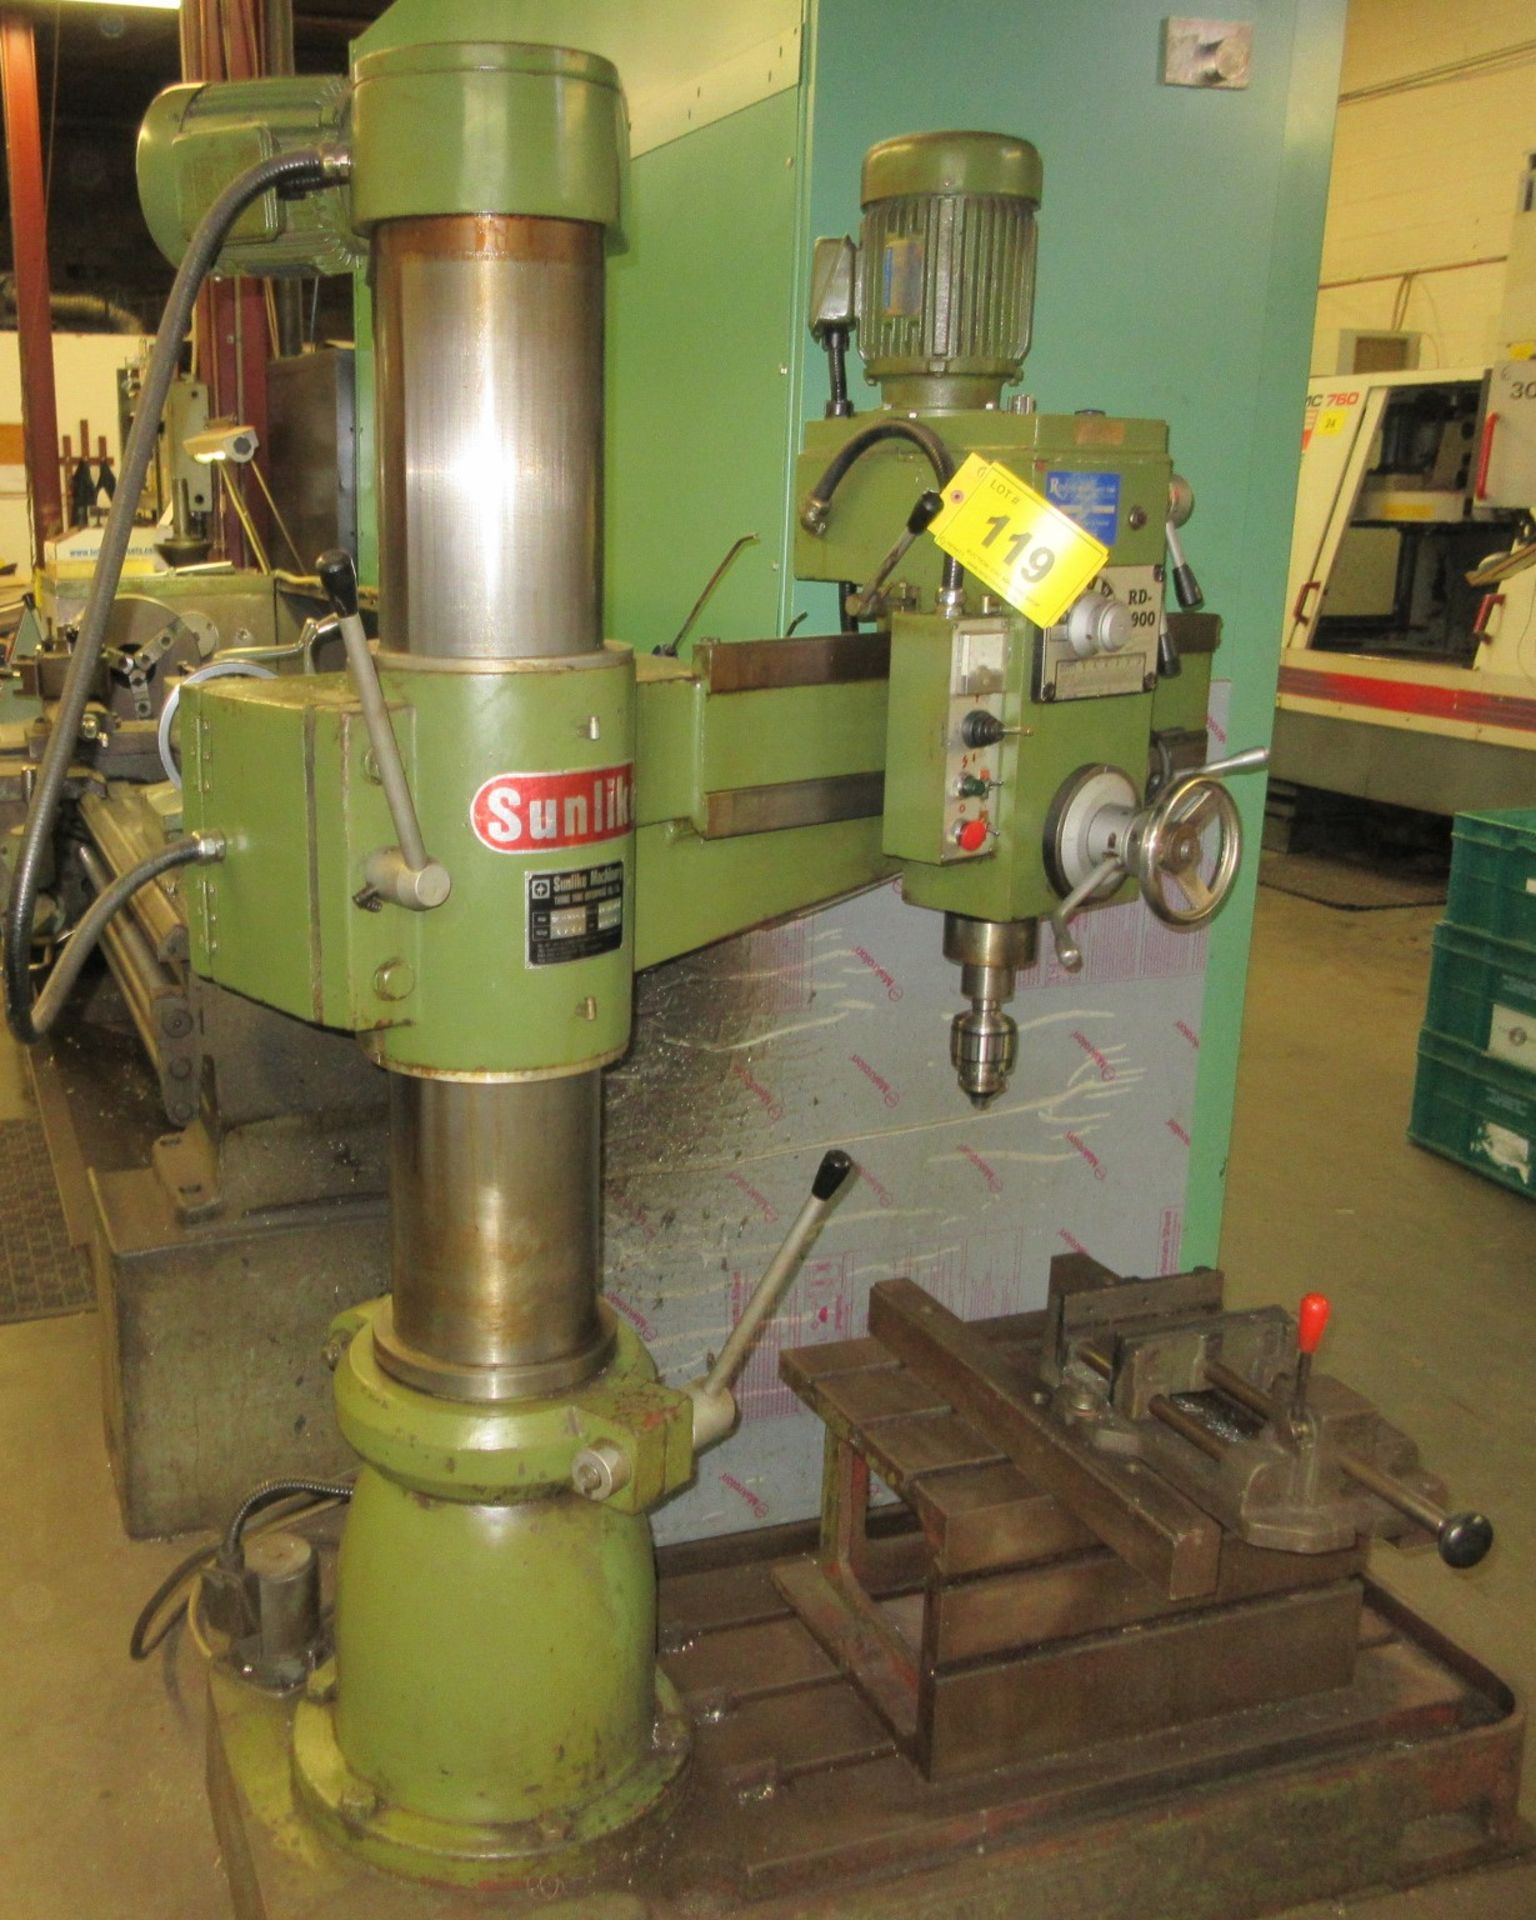 TONE FAN TF-900S RADIAL ARM DRILL, 4’ ARM, S/N TY-960707 W/ BOX TABLE AND VISE - Image 2 of 11